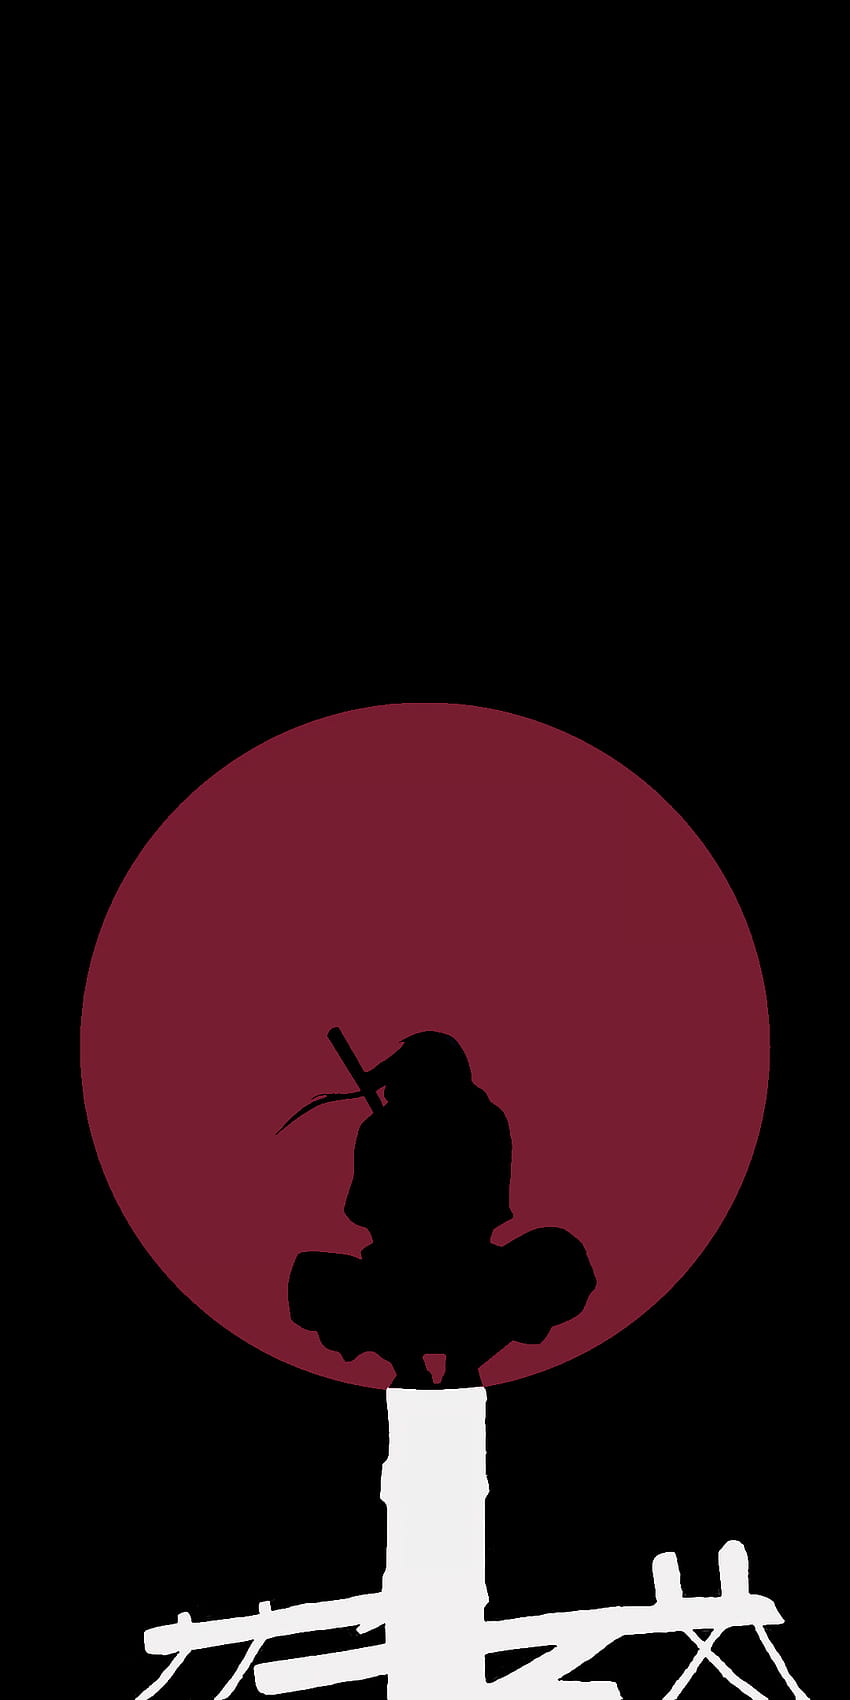 OC] Yet another minimalist Itachi . Made the moon red and pole white to resemble the Uchiha crest. : Naruto HD phone wallpaper